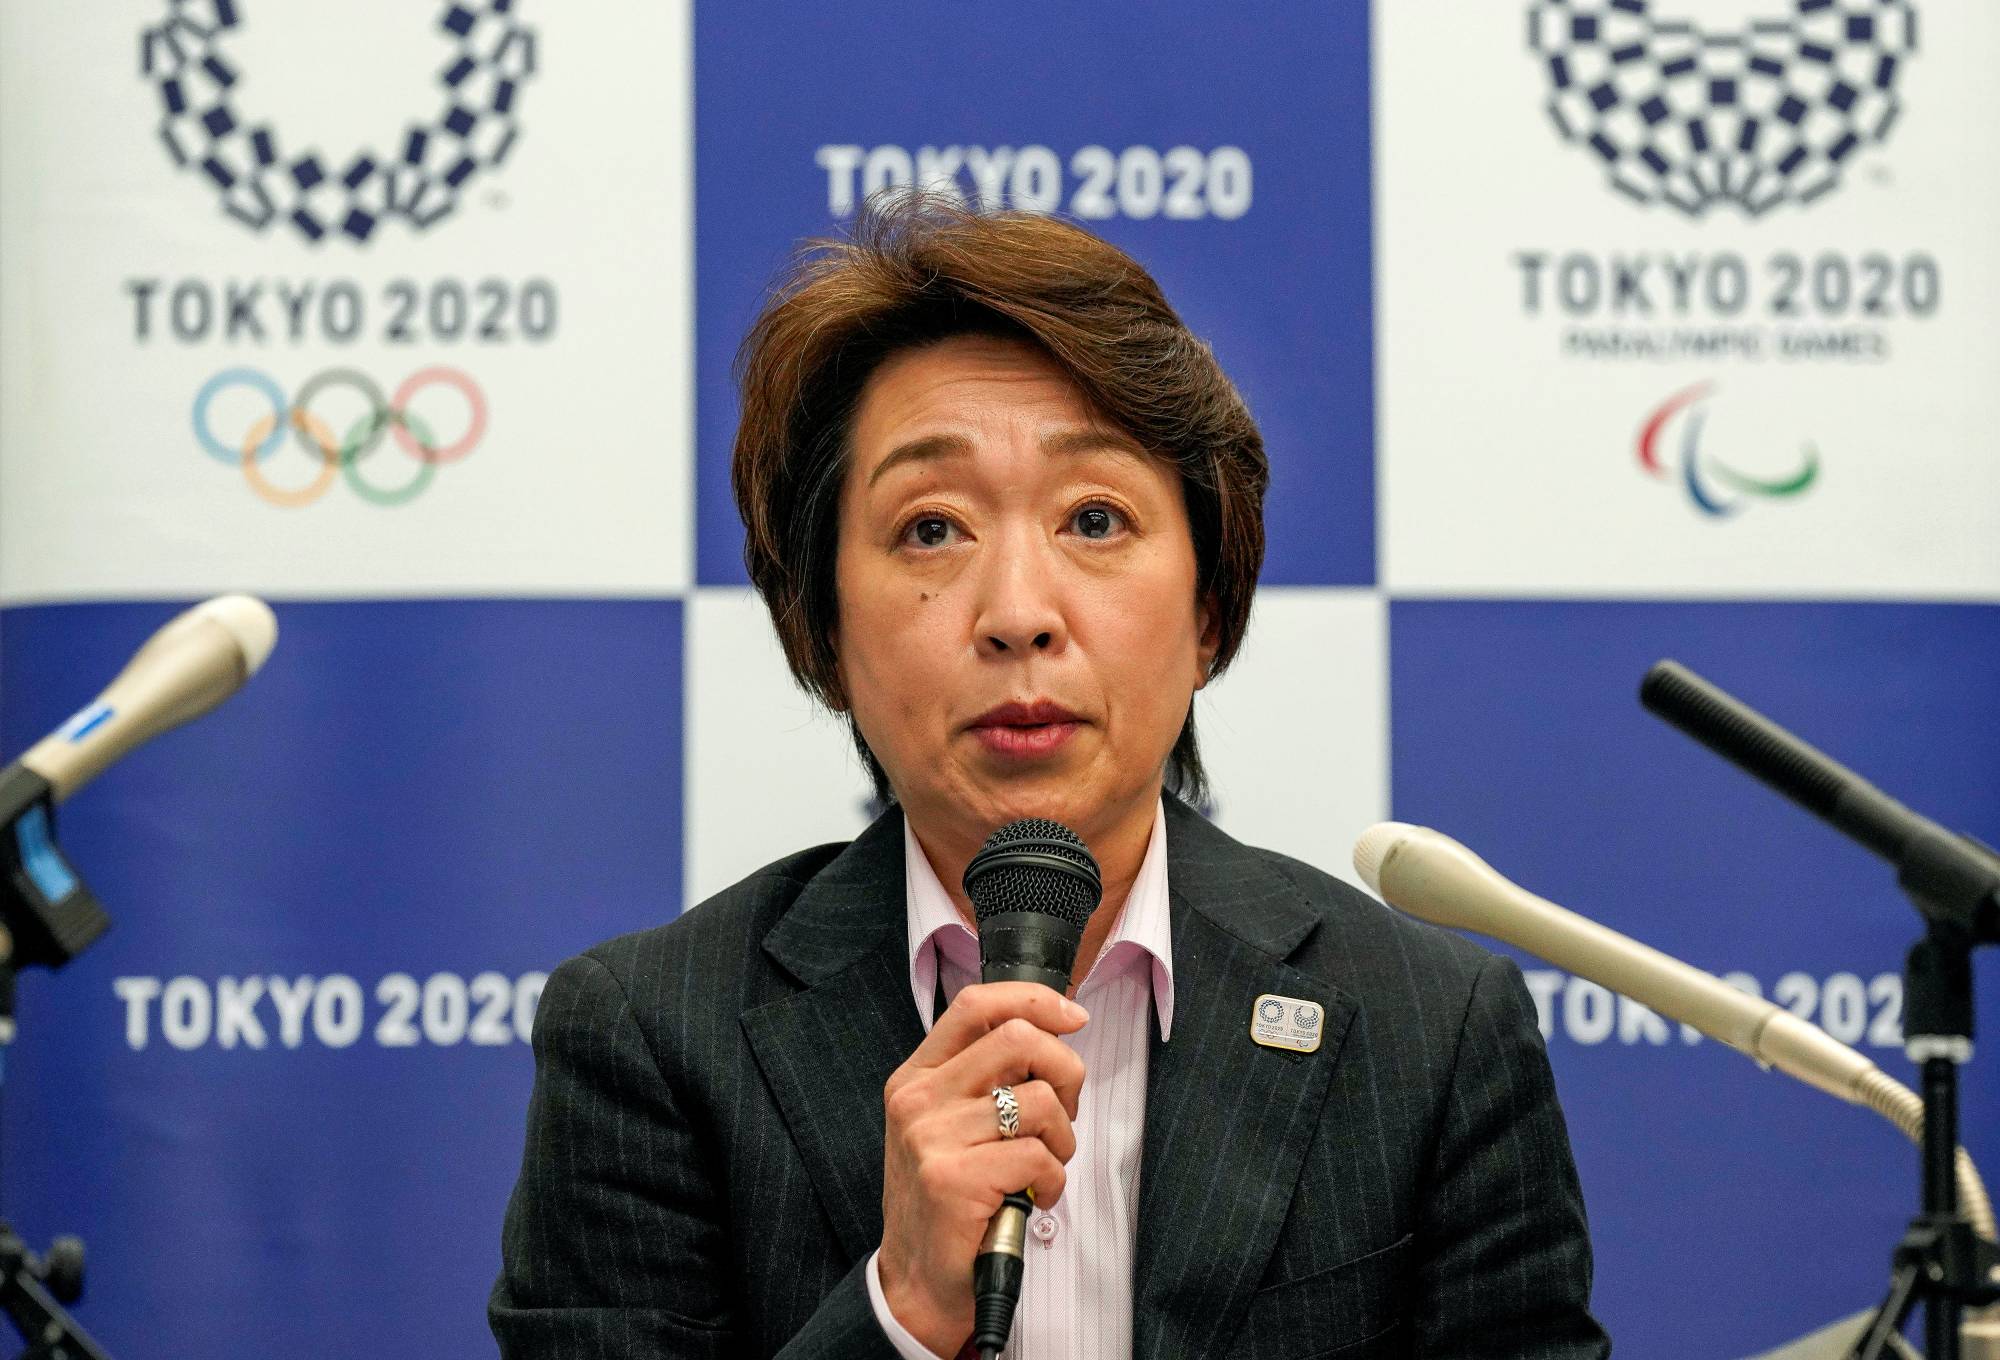 Seiko Hashimoto, President of the Tokyo 2020 Organising Committee, speaks during a media briefing after a council meeting in Tokyo, Japan March 3, 2021. | POOL / VIA REUTERS